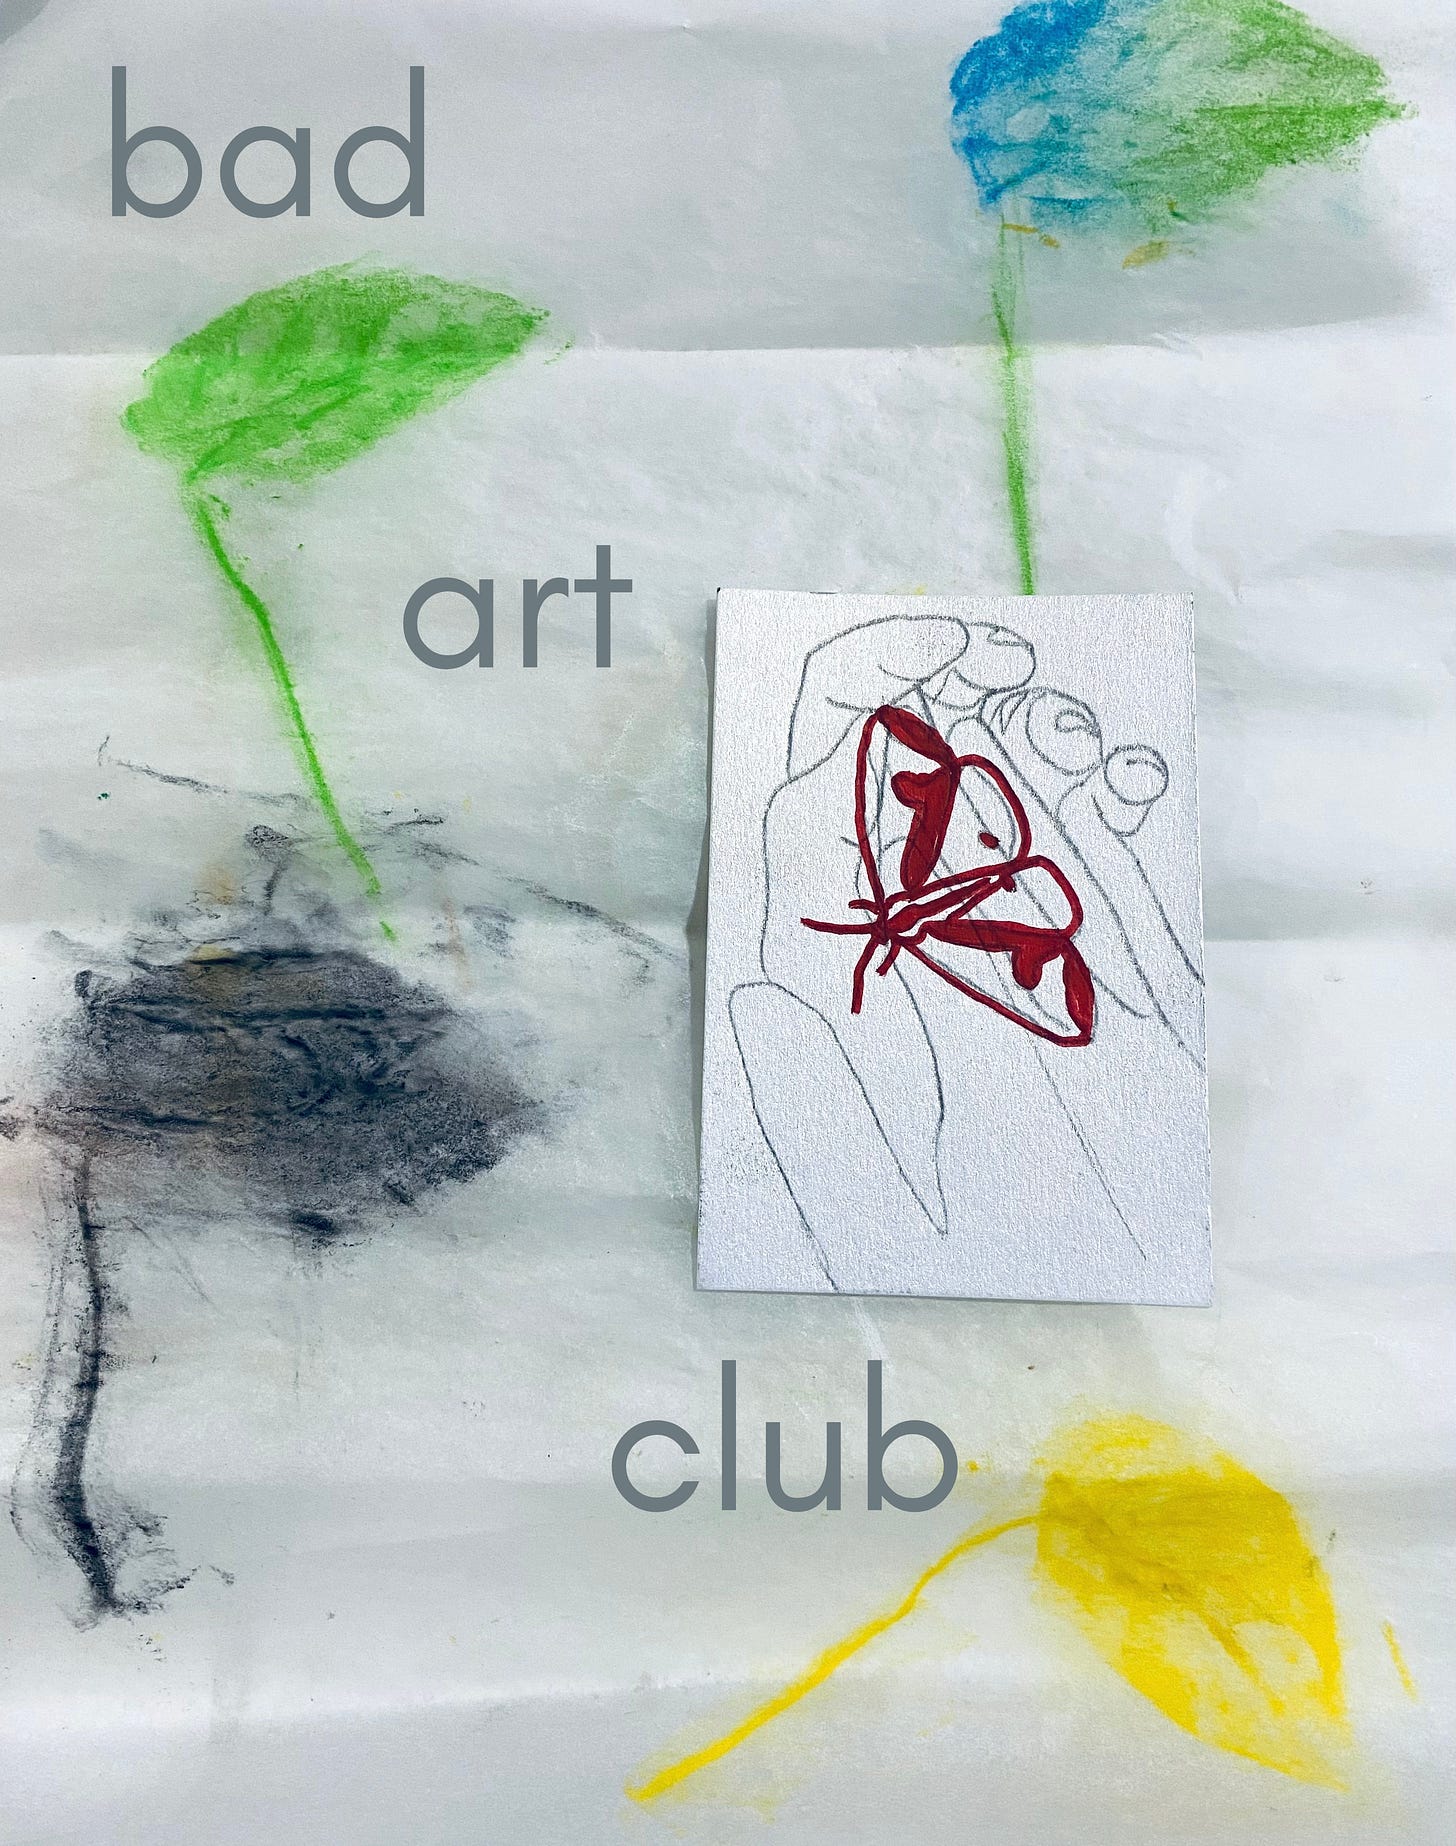 Transparent tracing paper with green, yellow, yellow and black leaf rubbings on it. A small pencil drawing of hands with a red marker drawing of a moth lays on top of the paper. The words "bad art club" are written in grey on to of the image.